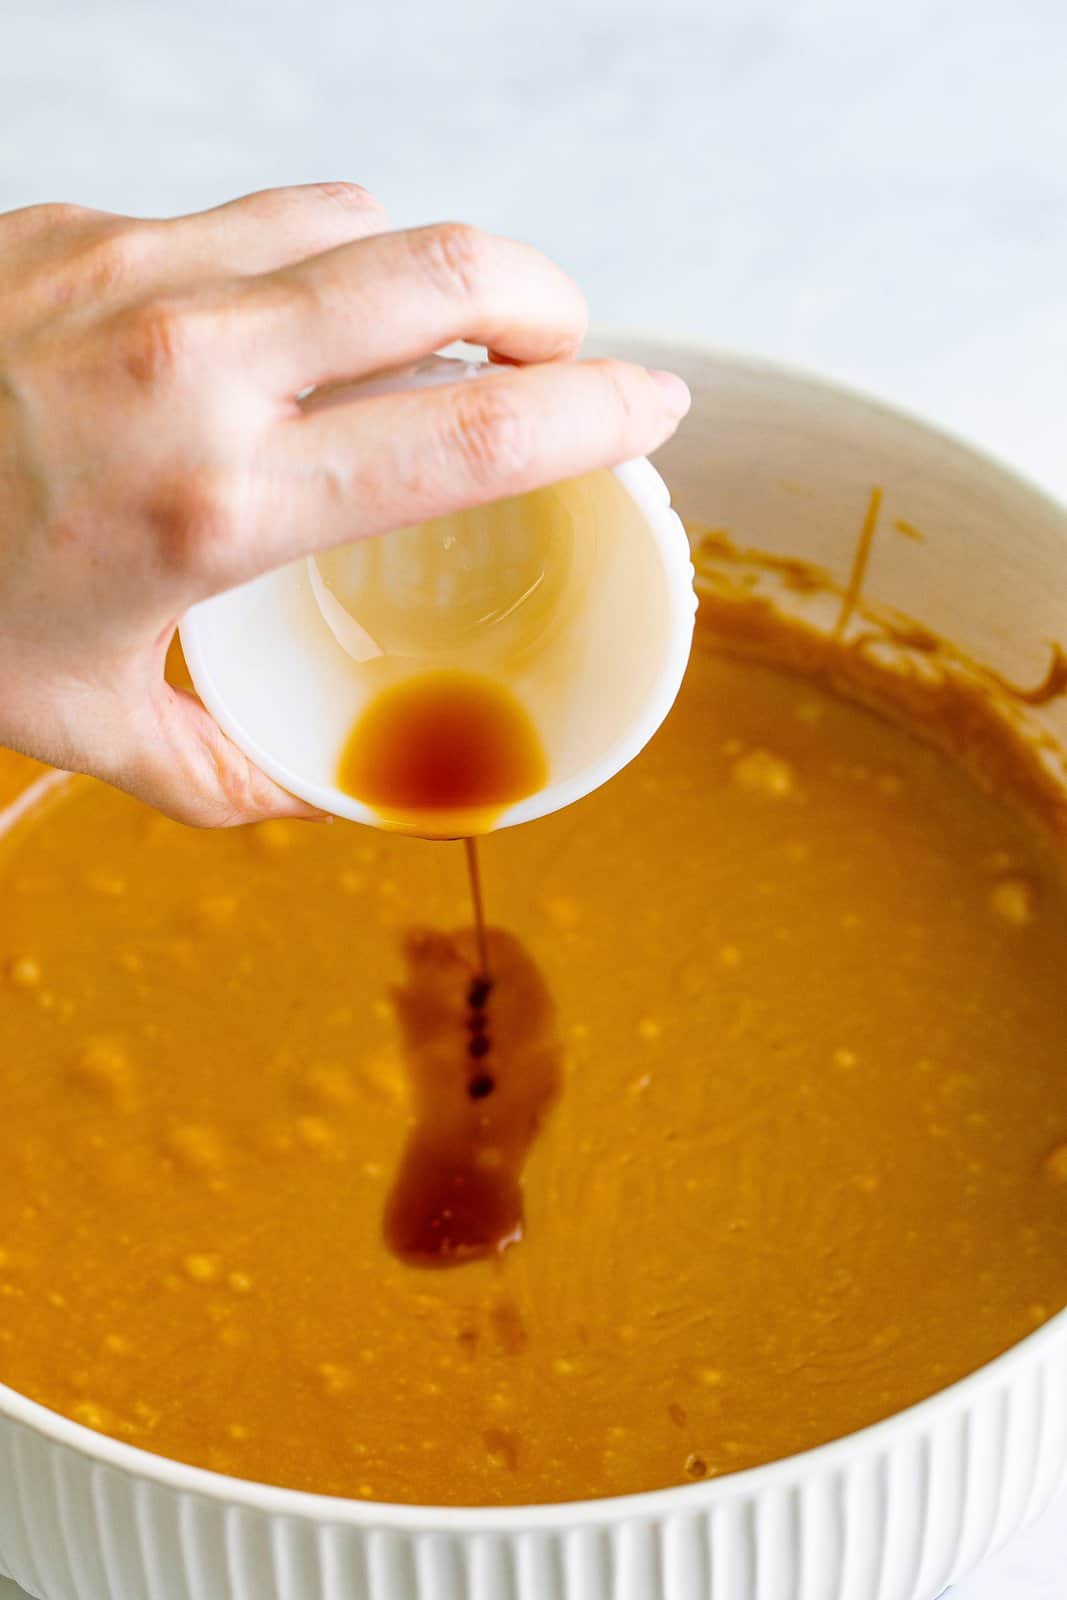 Vanilla being added to caramel mixture in bowl.